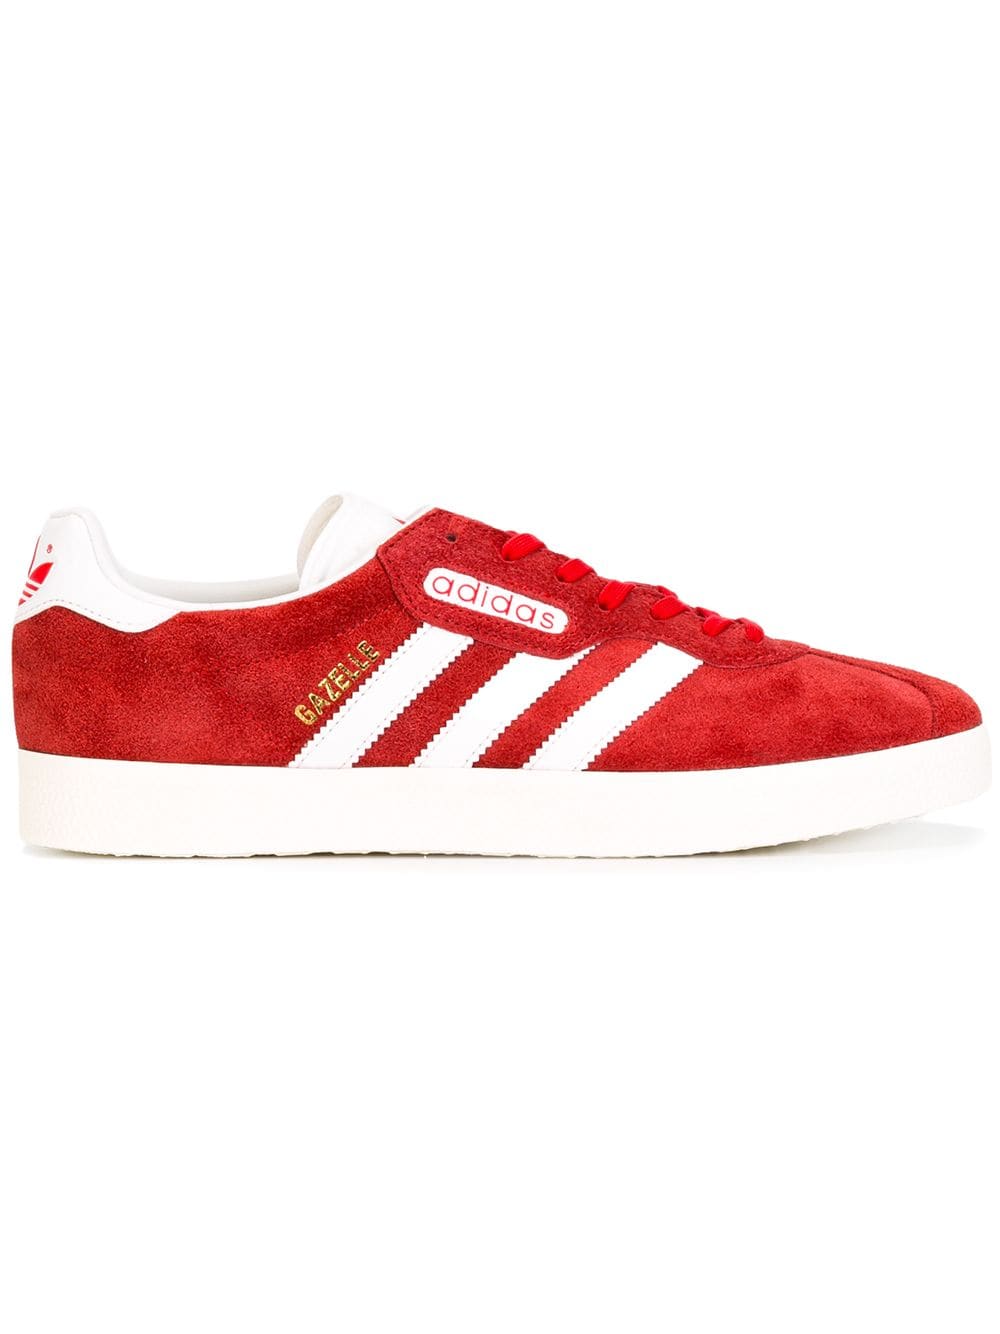 adidas lace up sneakers - Red von adidas